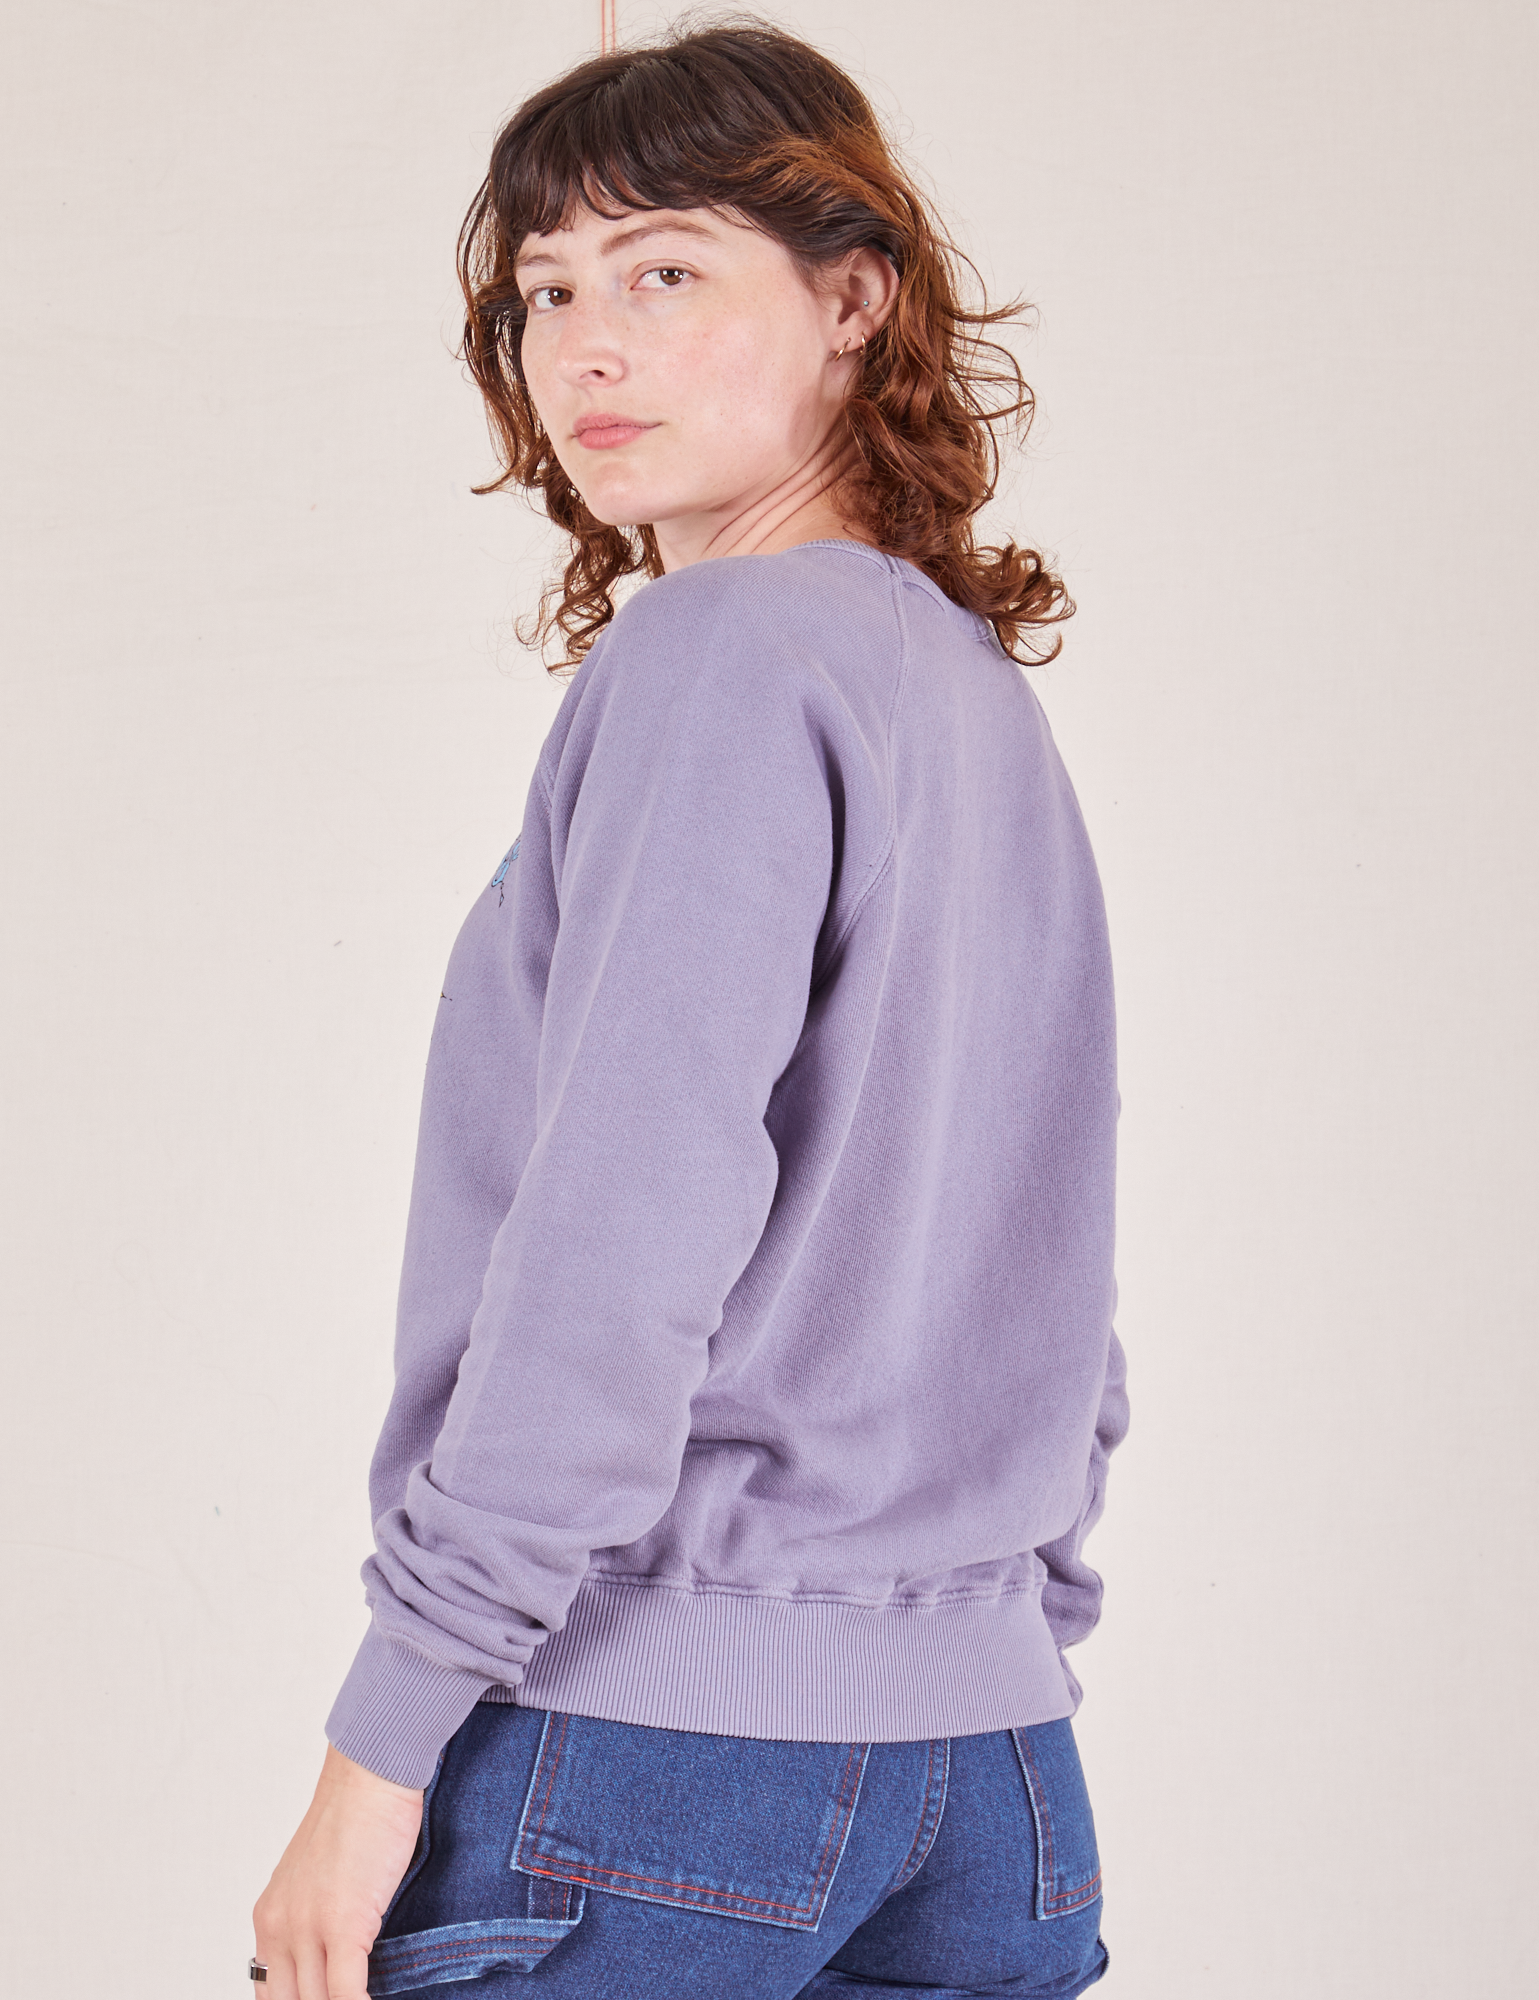 Bill Ogden&#39;s Sun Baby Crew in Faded Grape angled back view on Alex